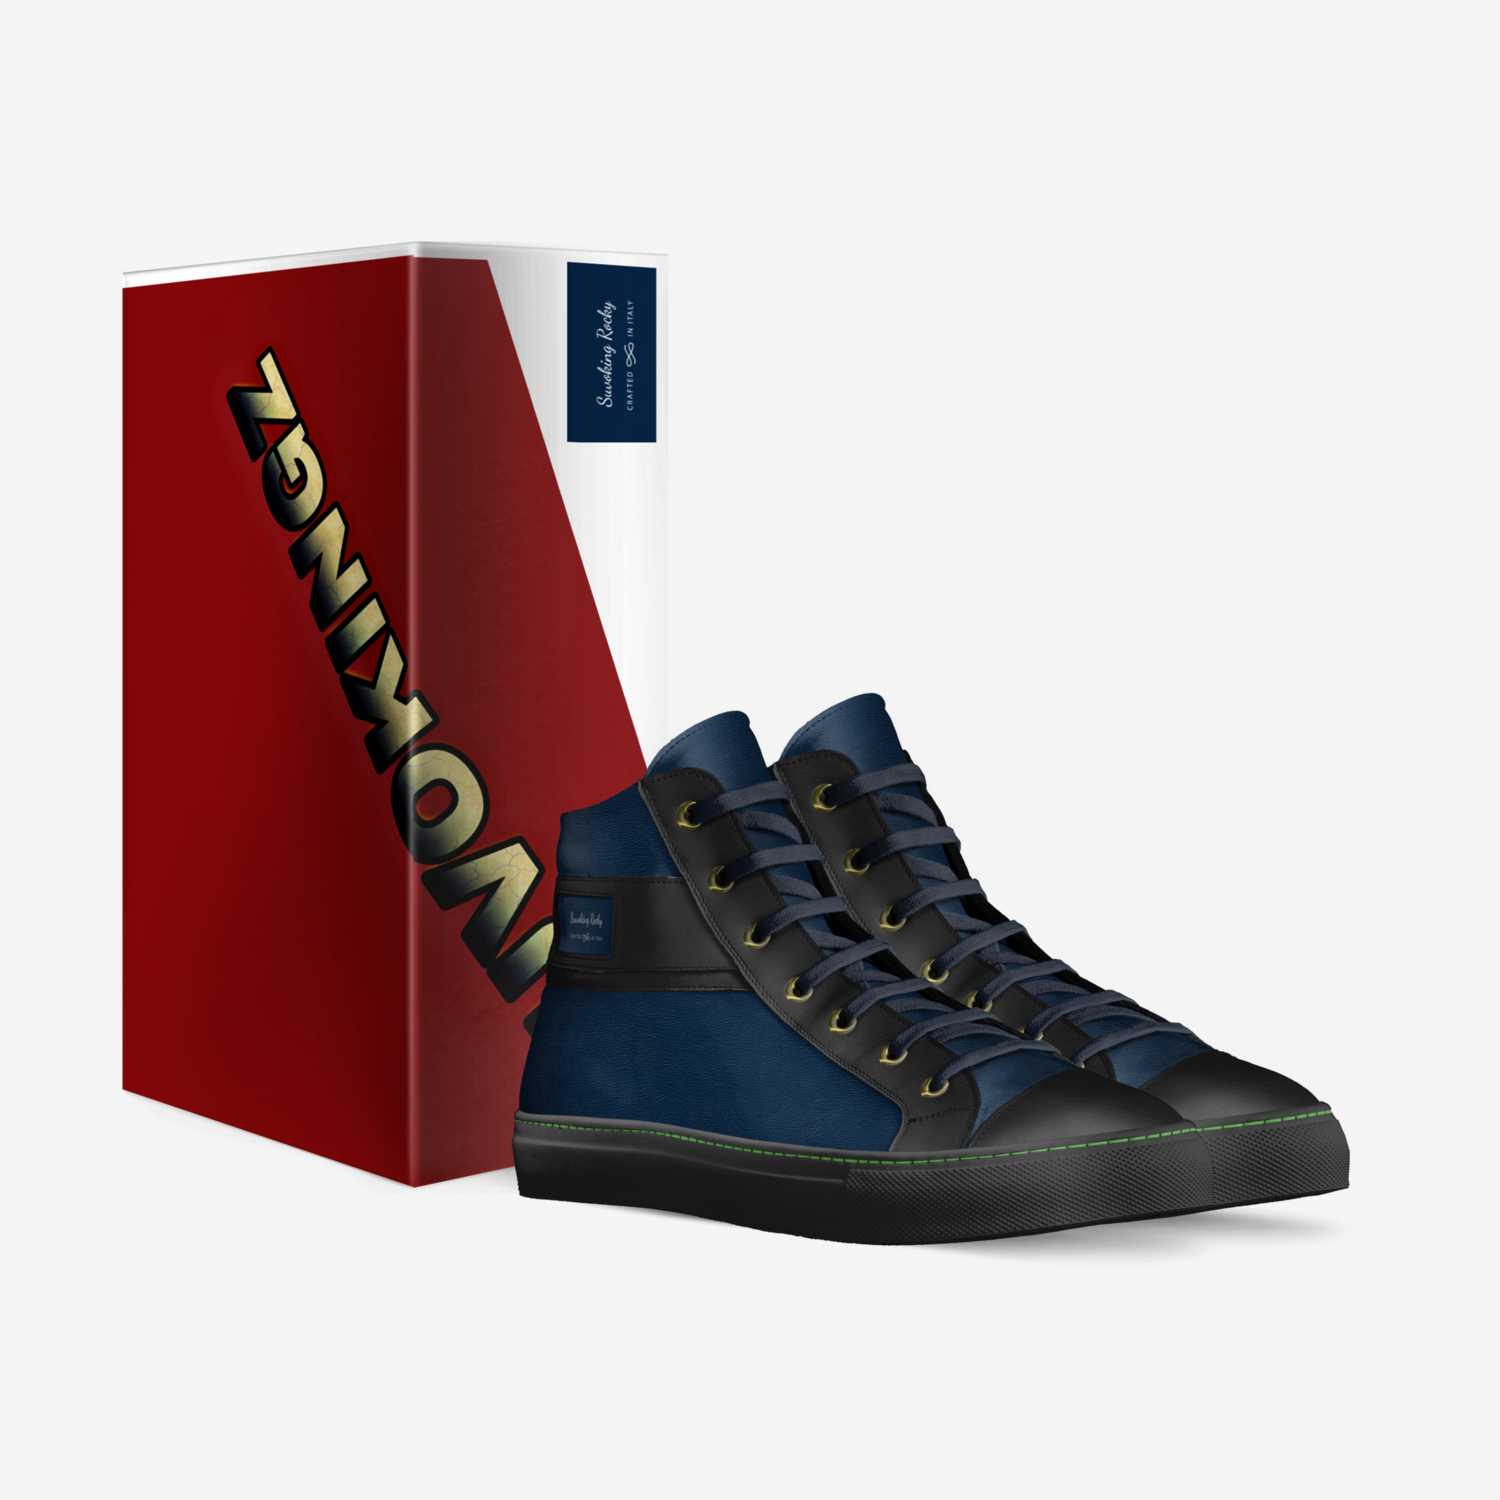 Suvoking Rocky custom made in Italy shoes by Wilbert White | Box view